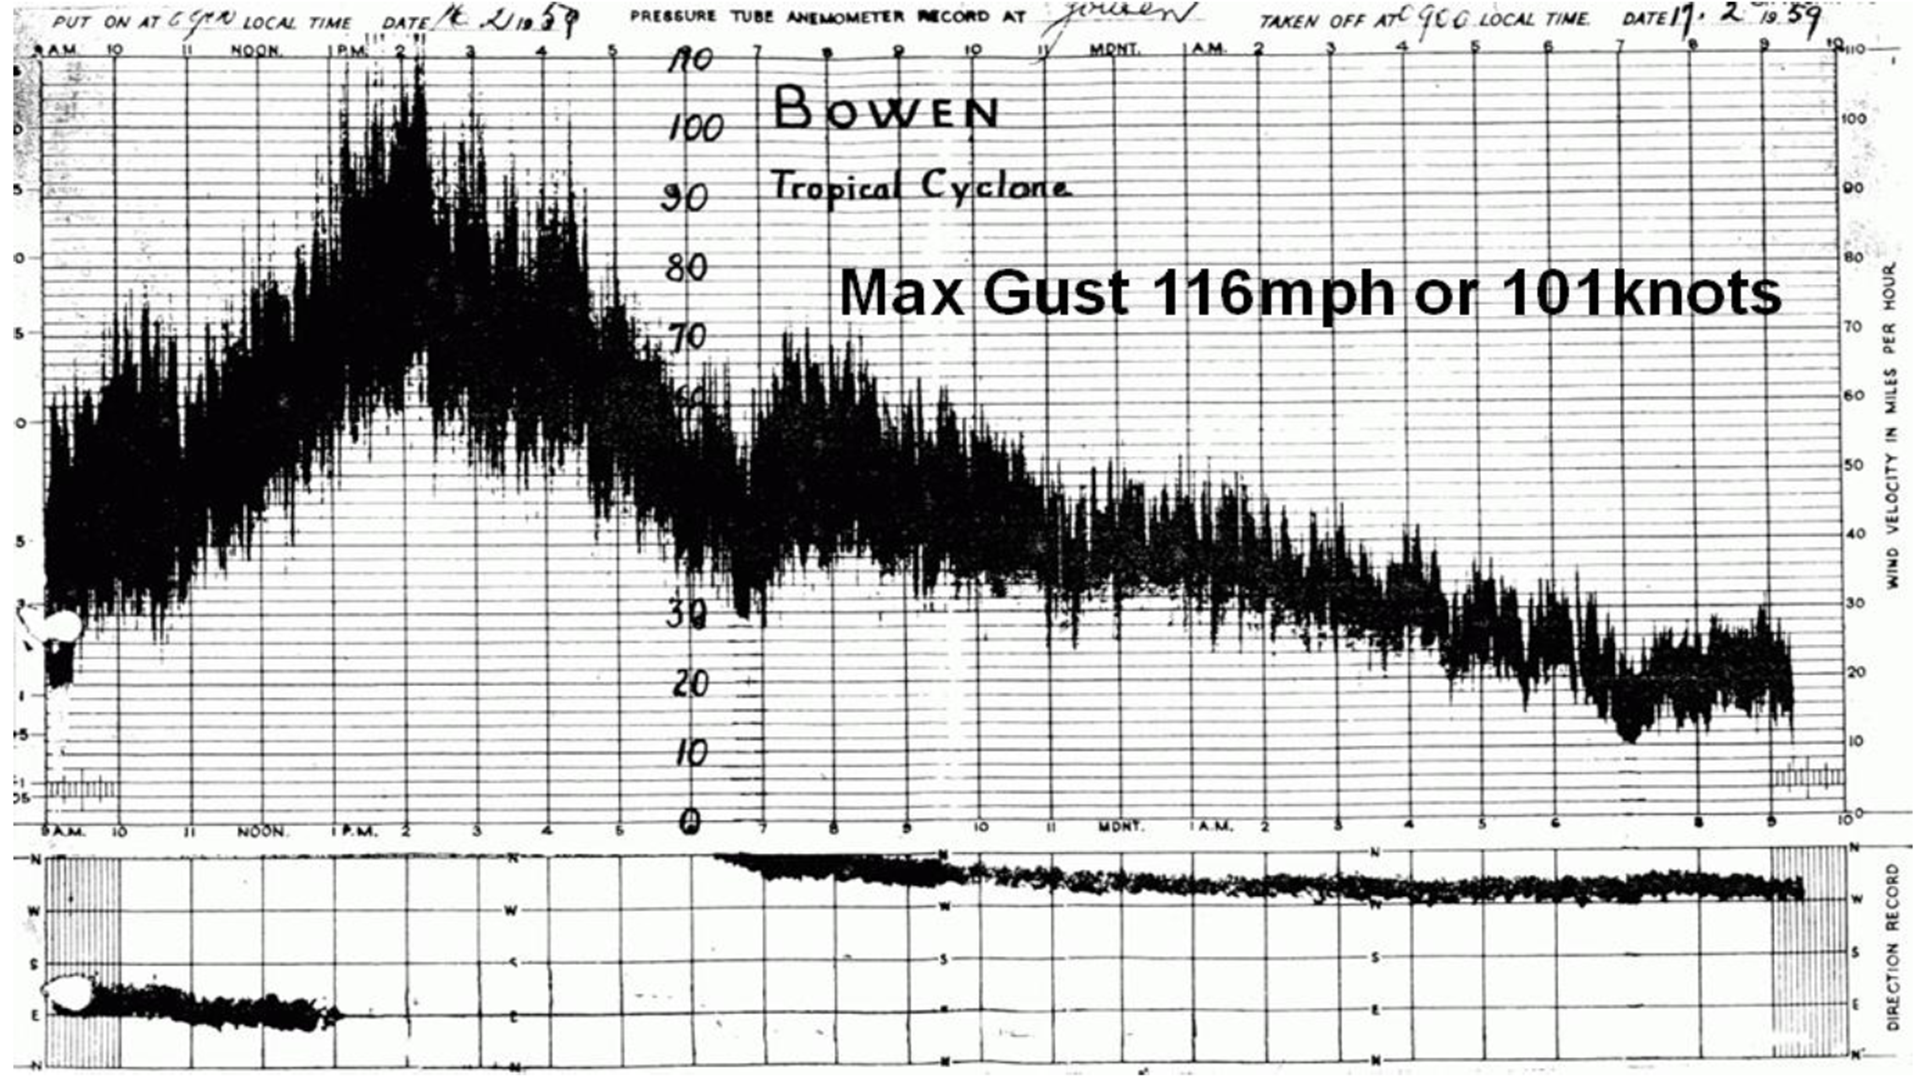 Anemometer chart from Bowen Airport during the passage of the 1959 tropical cyclone Connie